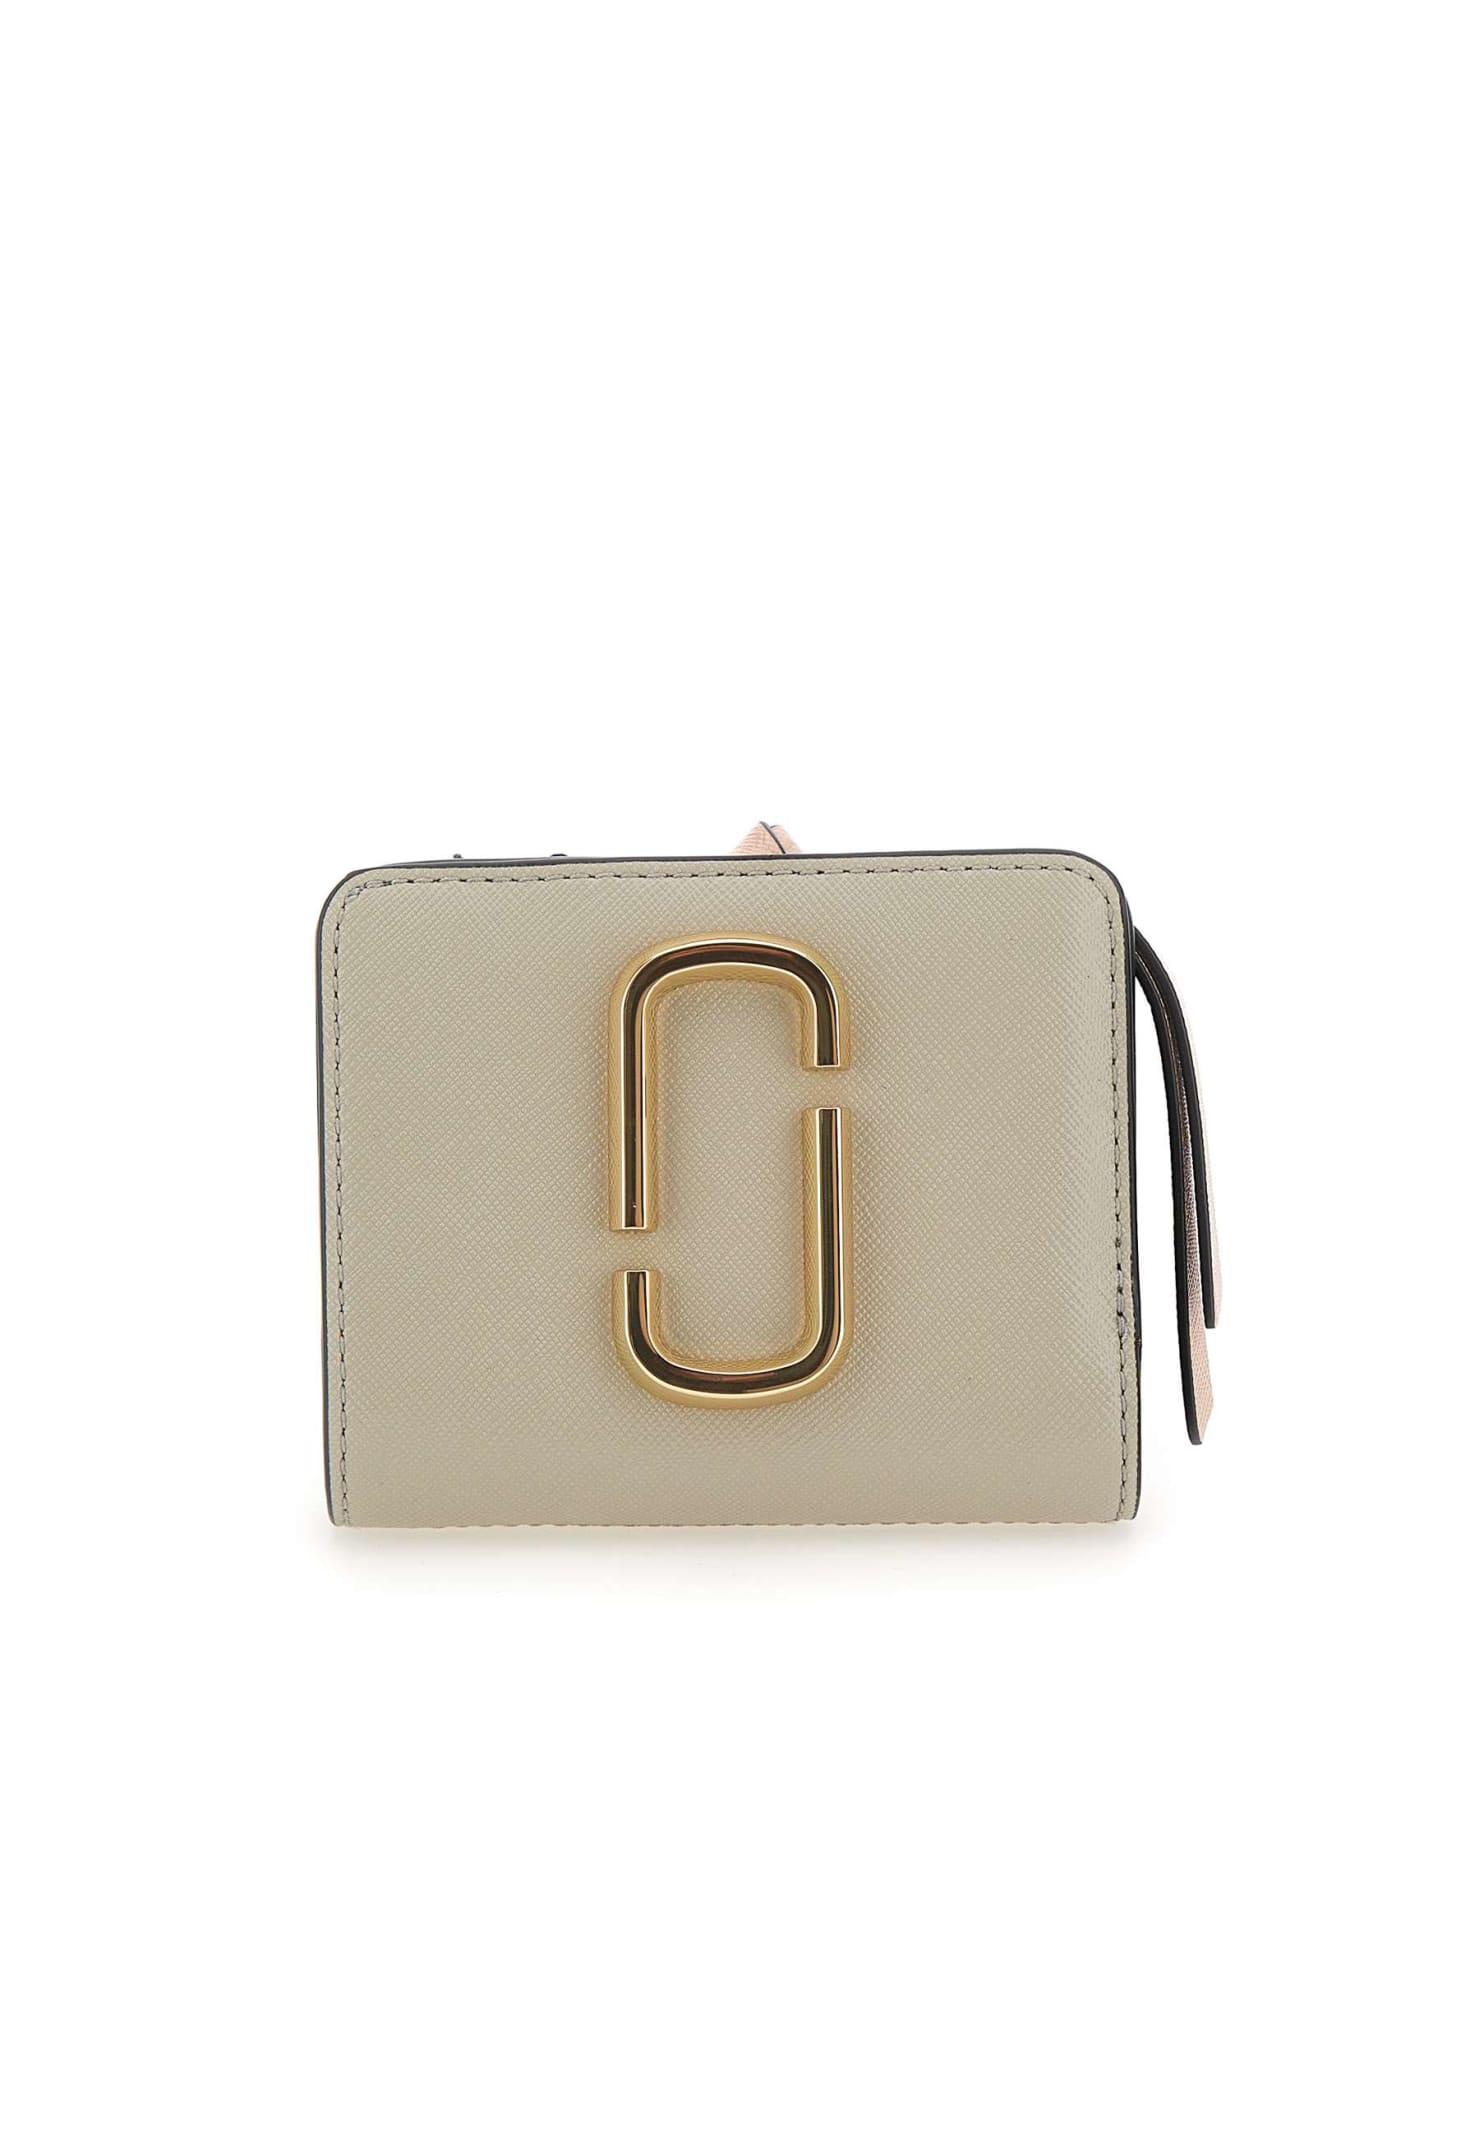 Marc Jacobs snapshot Mini Compact Leather Wallet